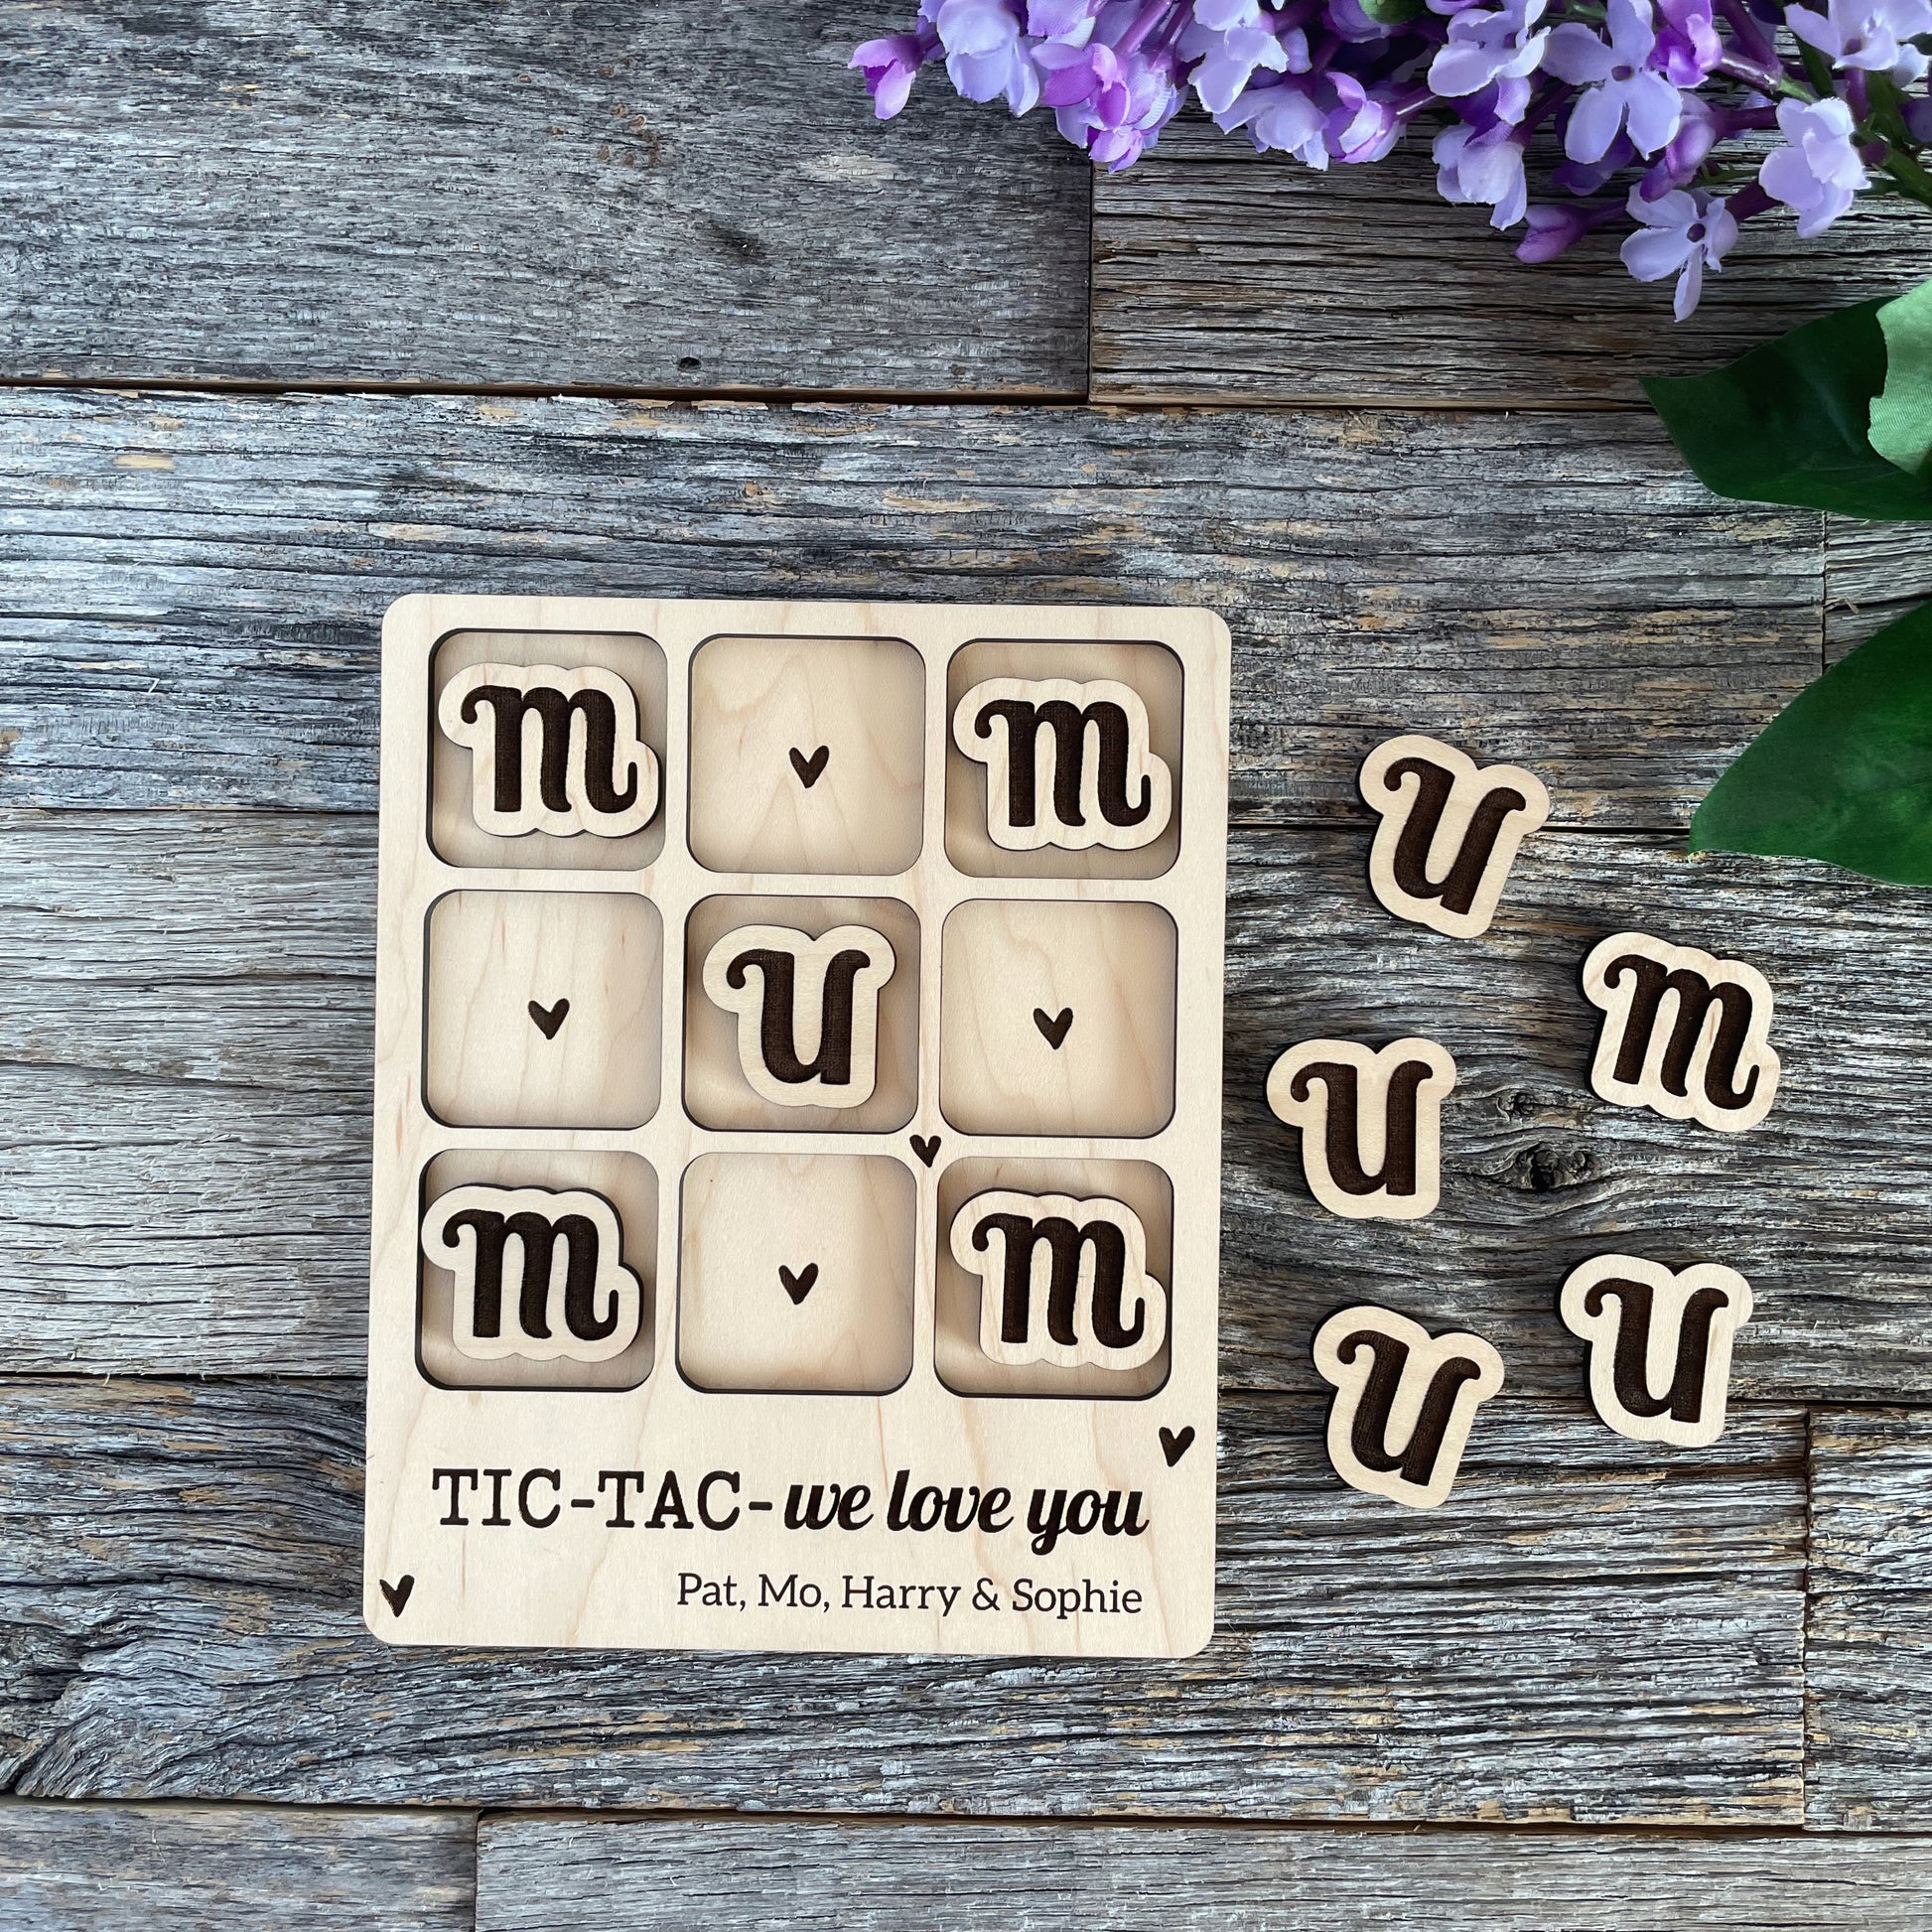 Laser cut We love you Mom, Mum, Tic Tac Toe for Moms and Mums from children